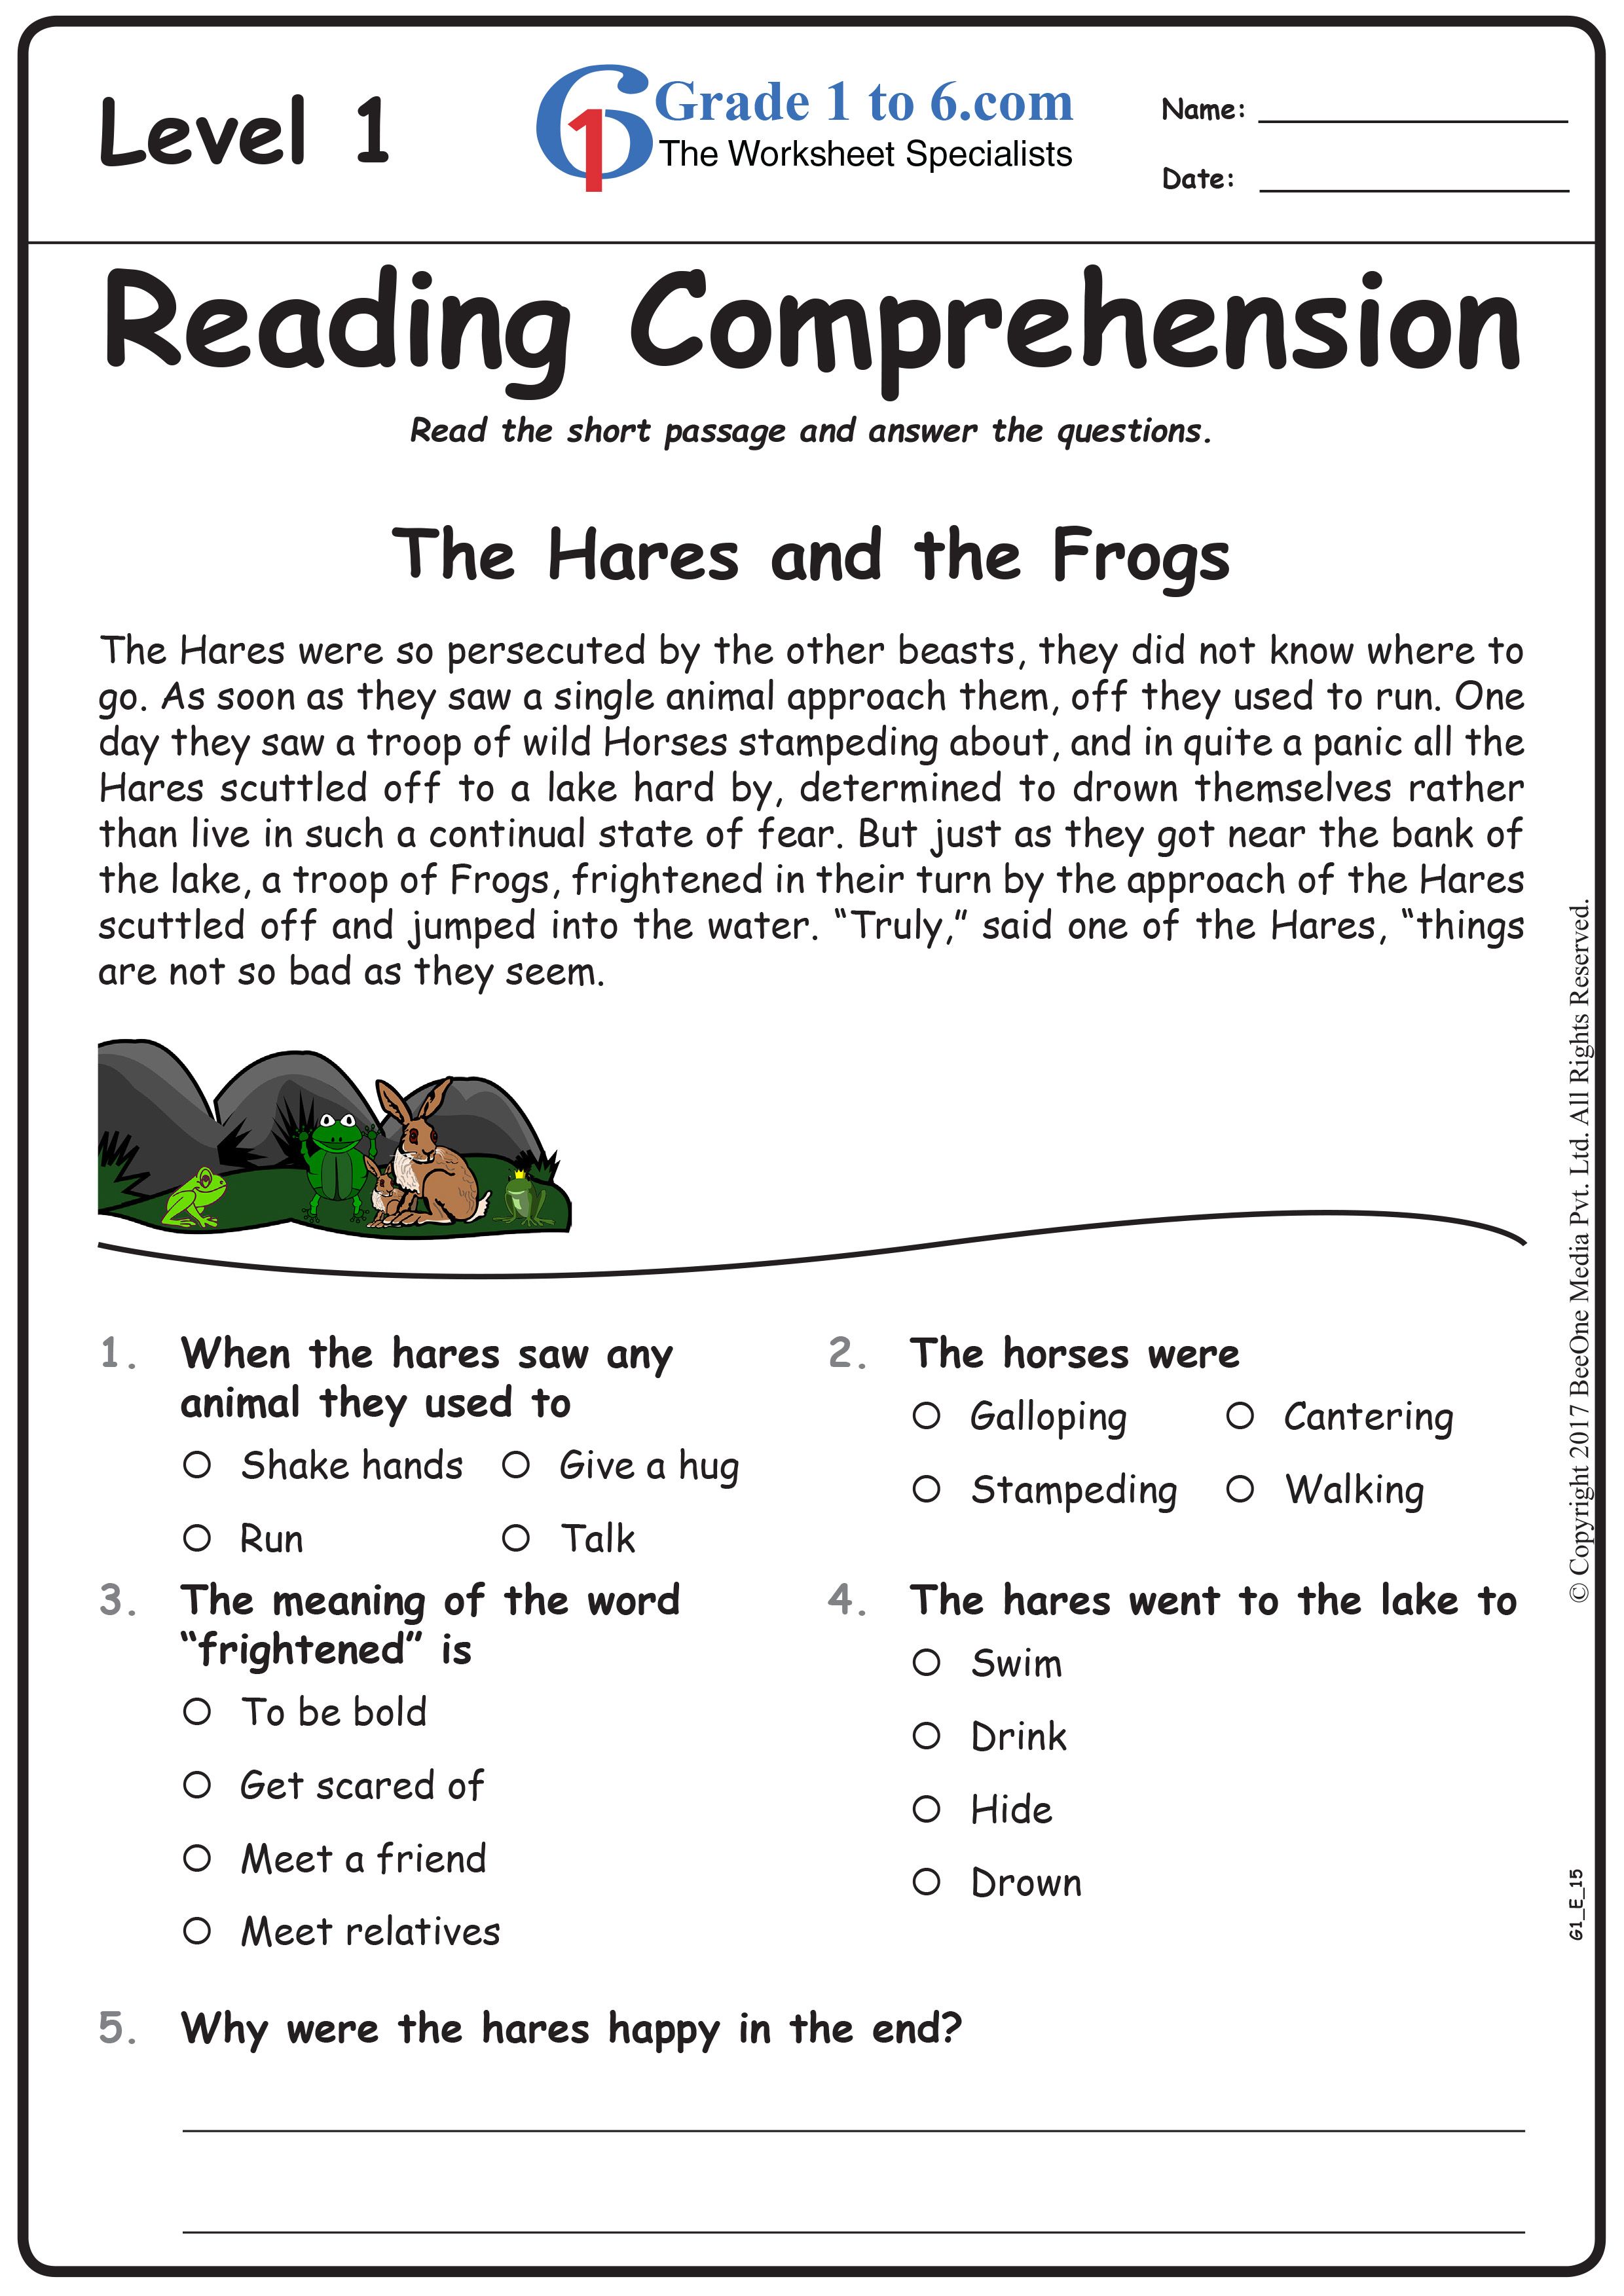 dissertation about reading comprehension